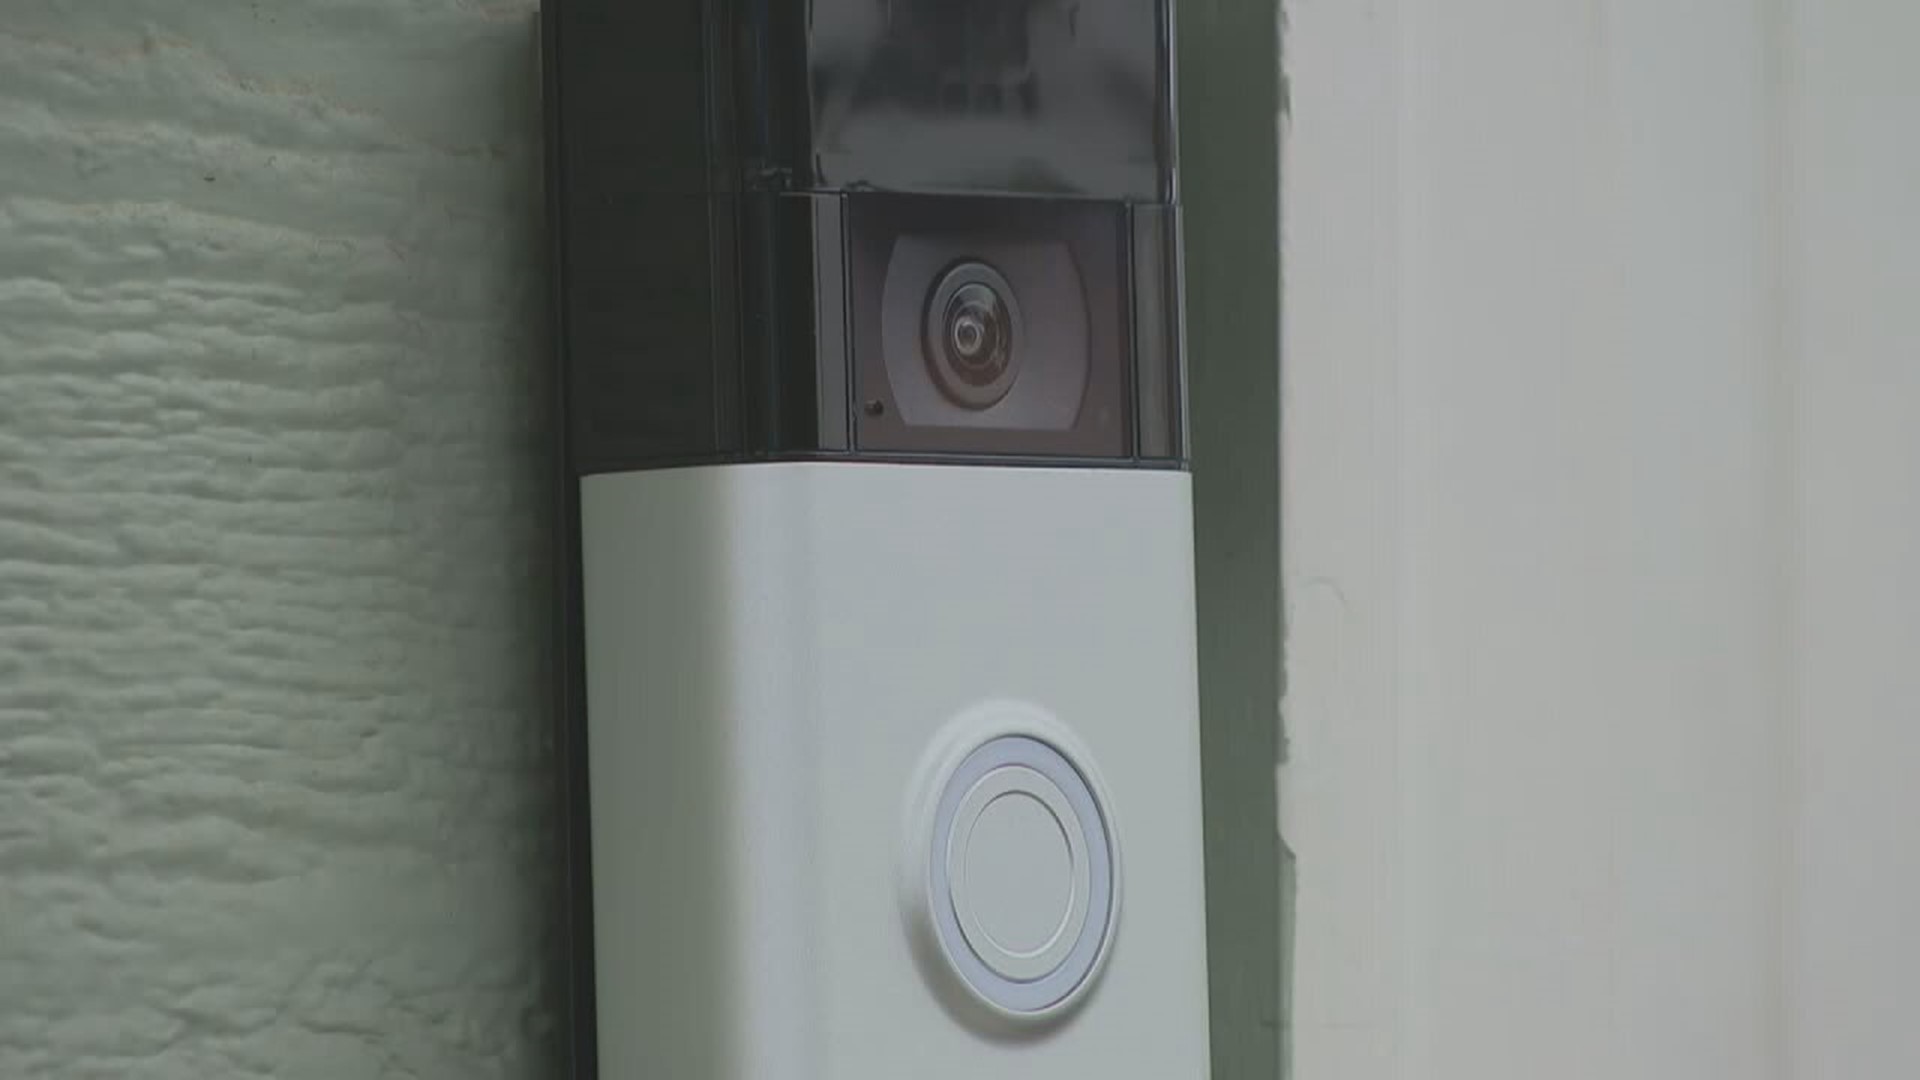 The Amazon-owned company's removal of the "Request for Assistance" tool on its Neighbors app highlights the use of doorbell camera footage by law enforcement.